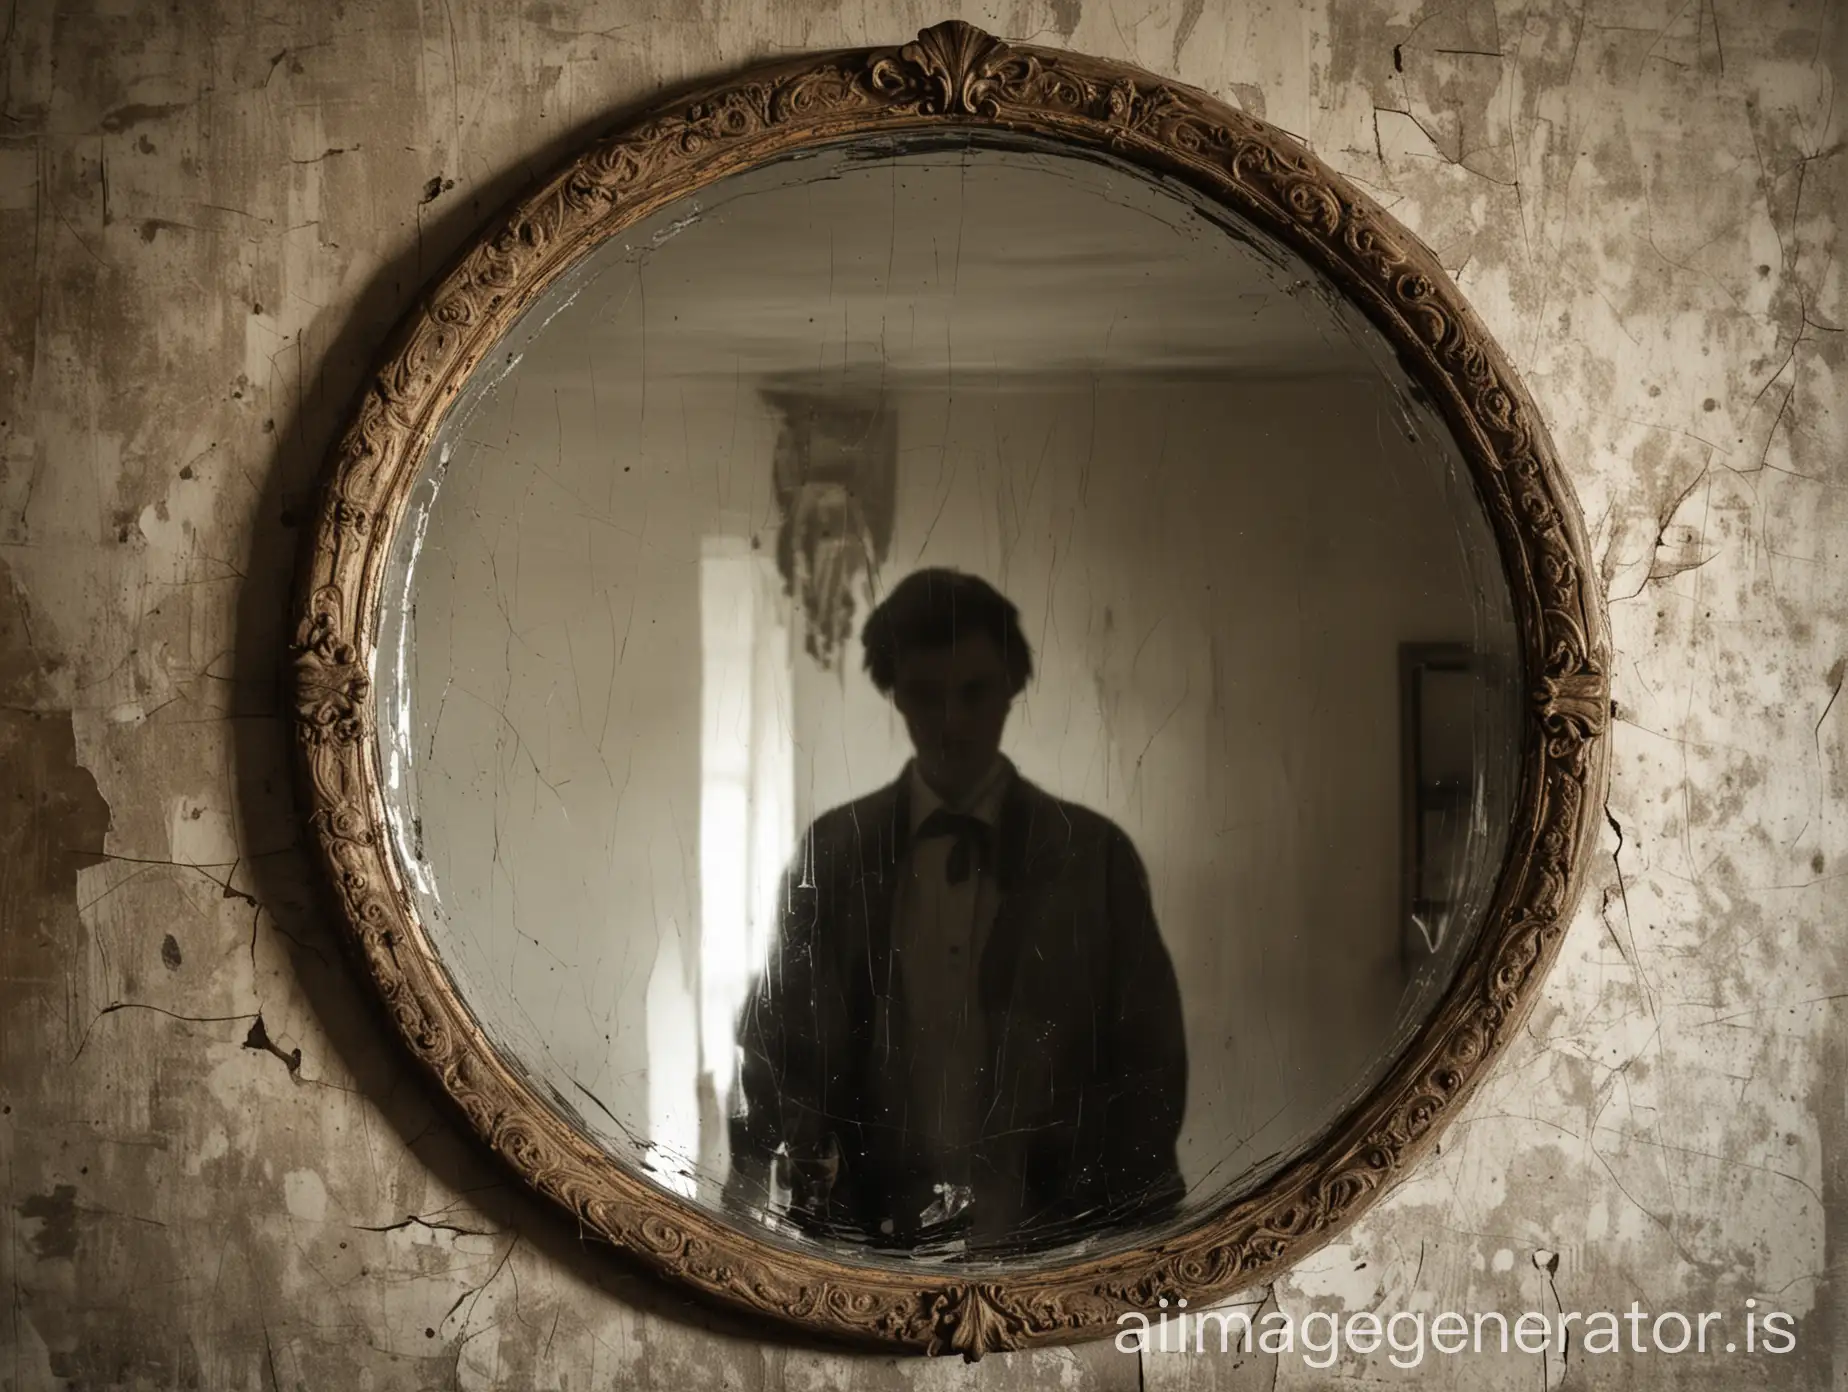 Antique-Mirror-with-Shadowy-Figure-Reflection